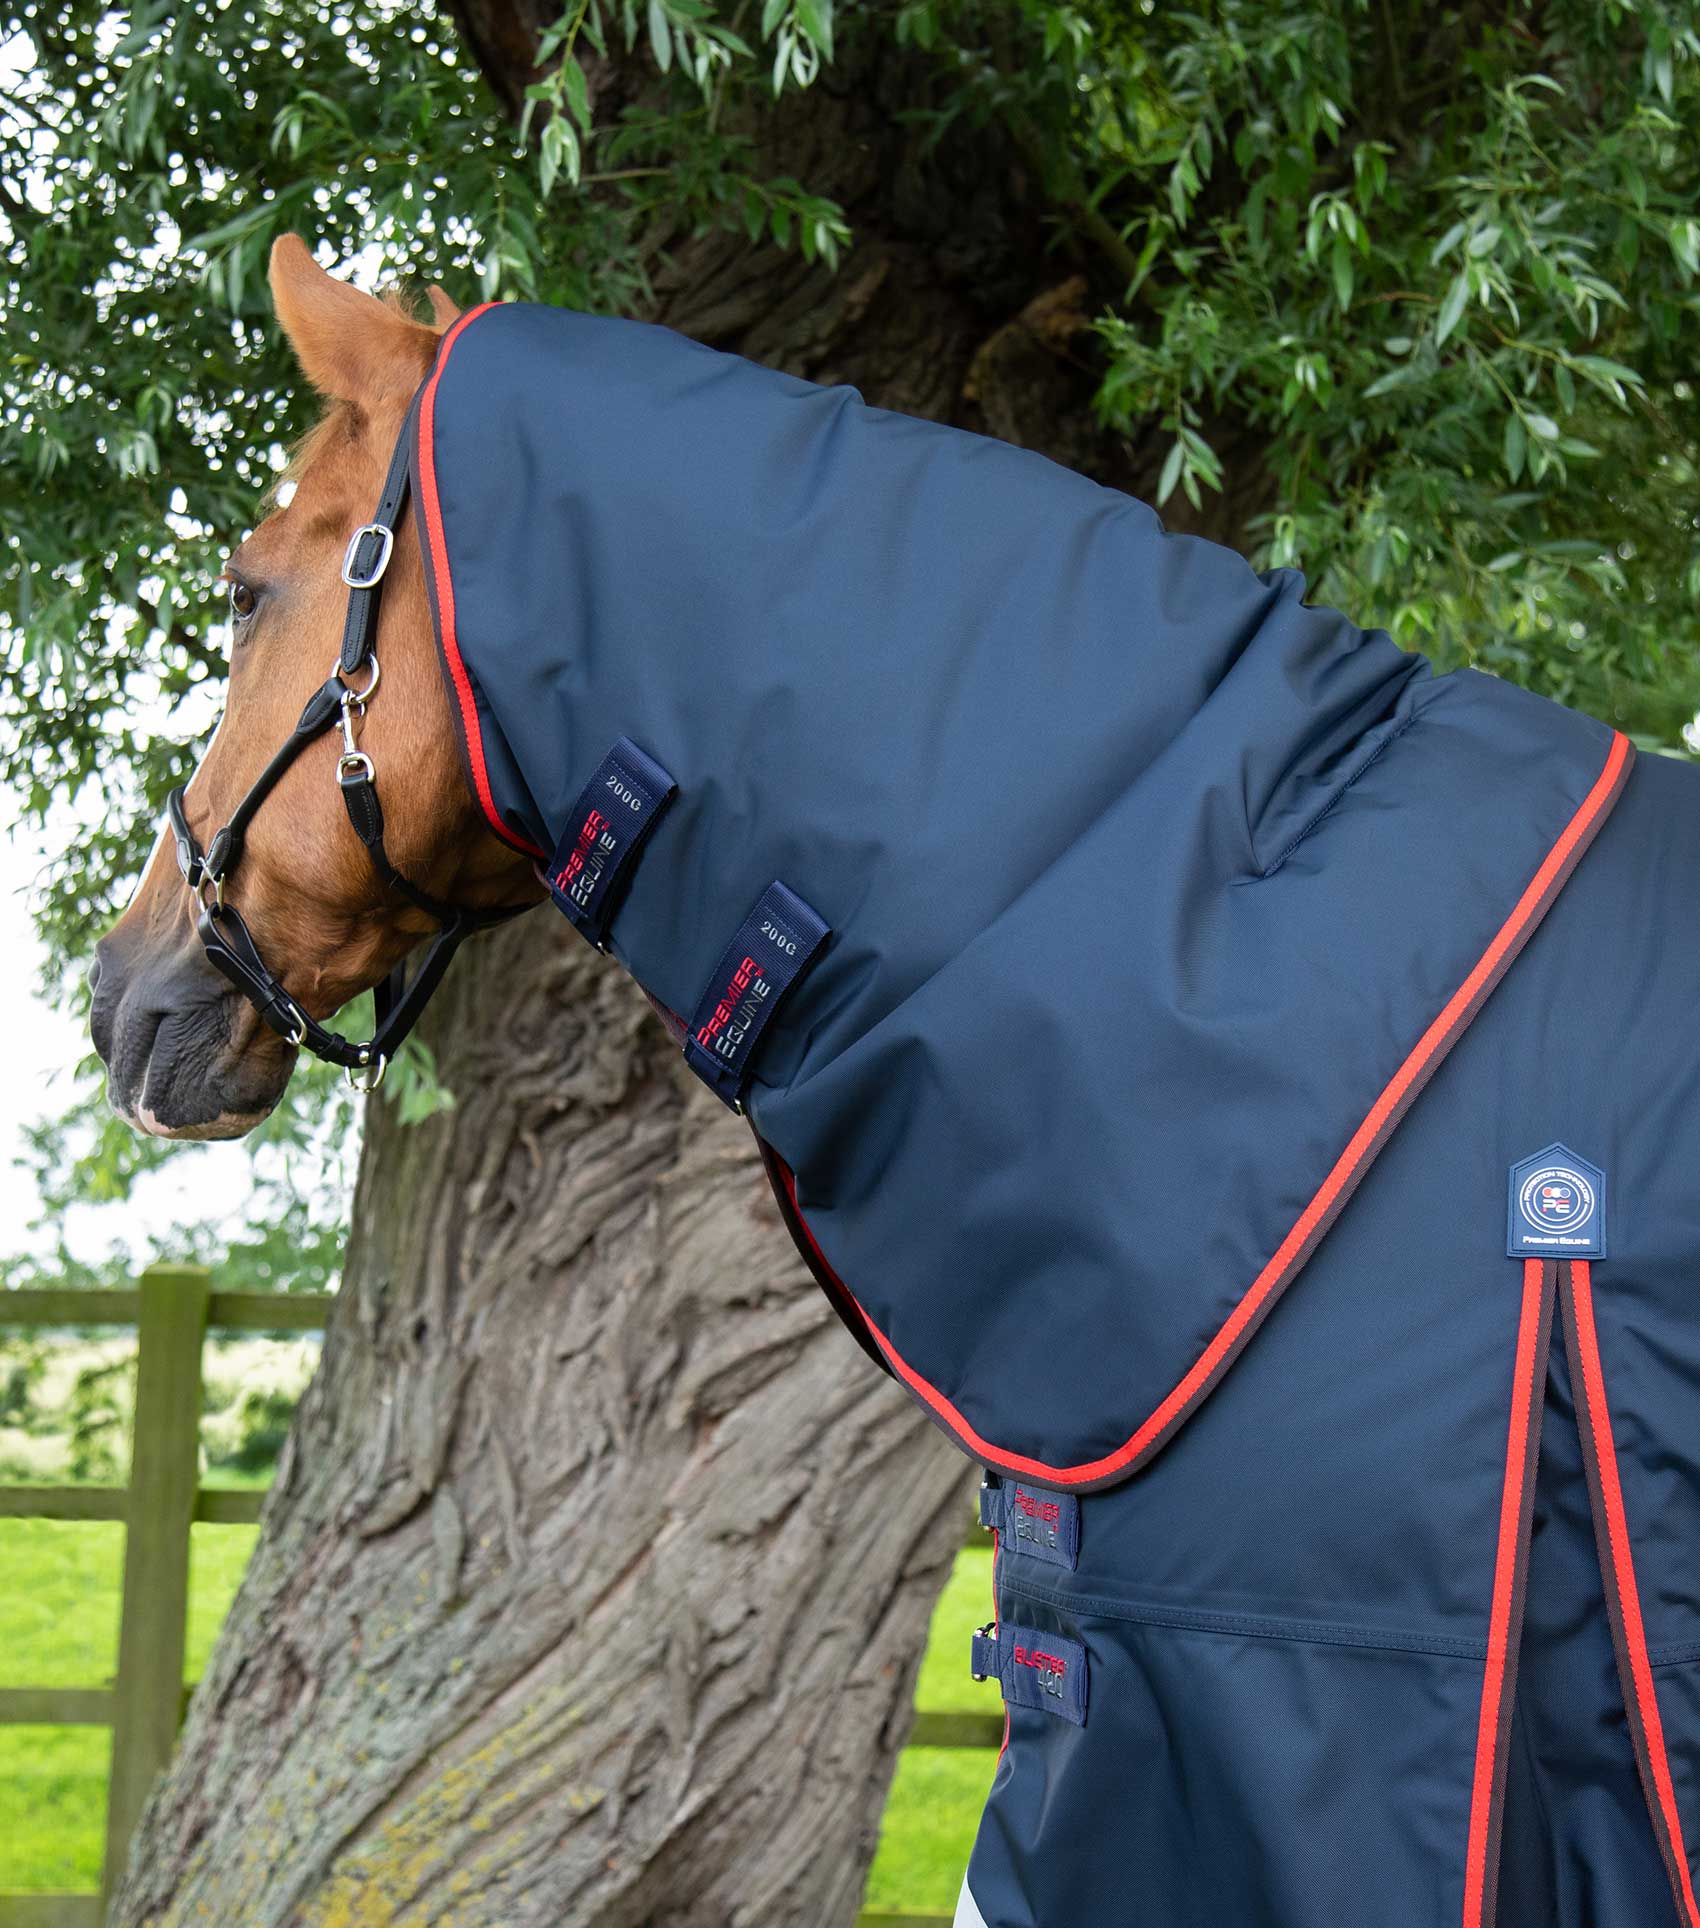 Premier Equine Buster 420g Turnout Rug With Classic Neck Cover